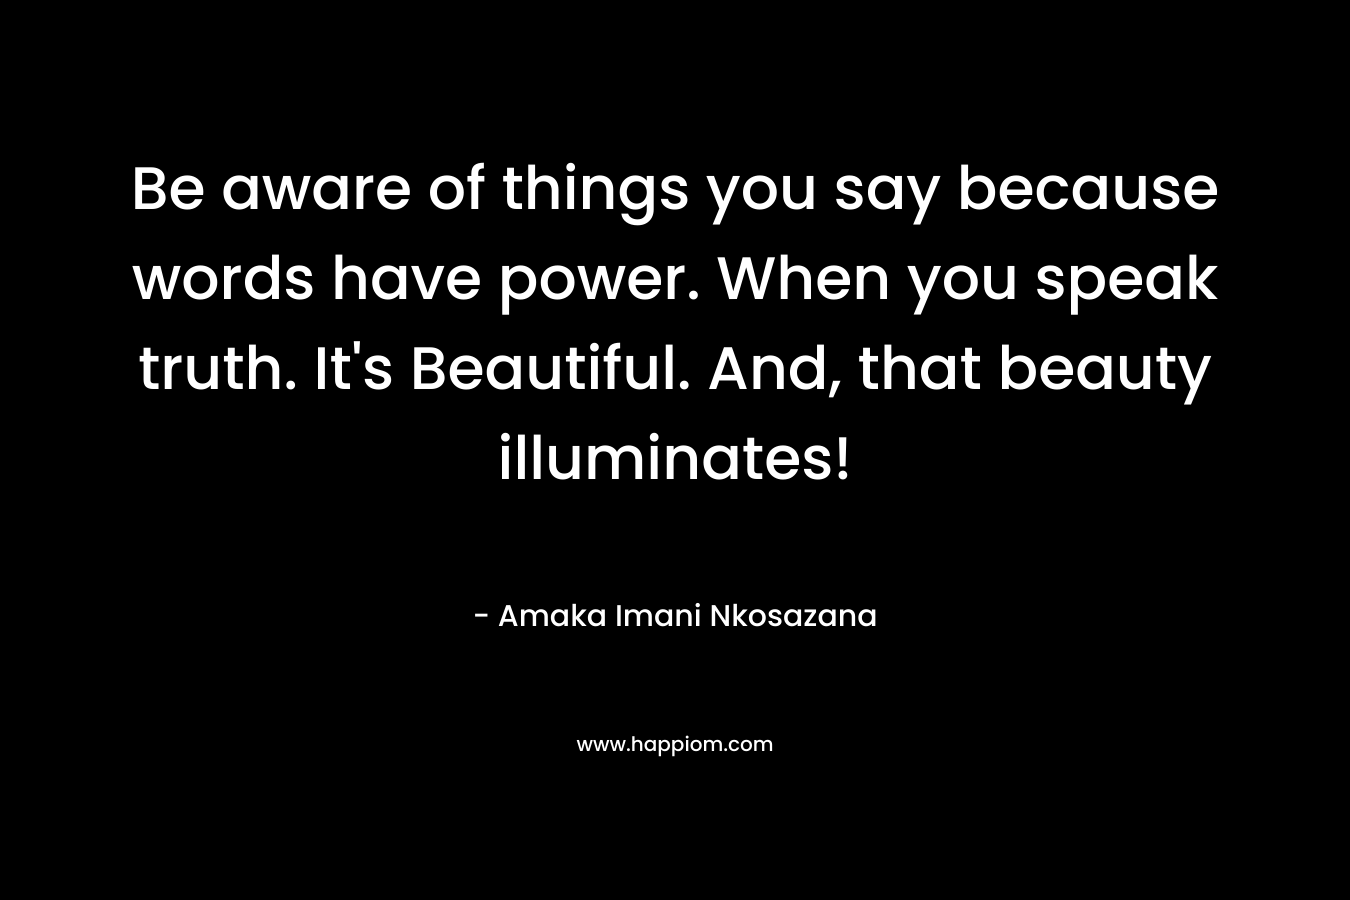 Be aware of things you say because words have power. When you speak truth. It's Beautiful. And, that beauty illuminates!